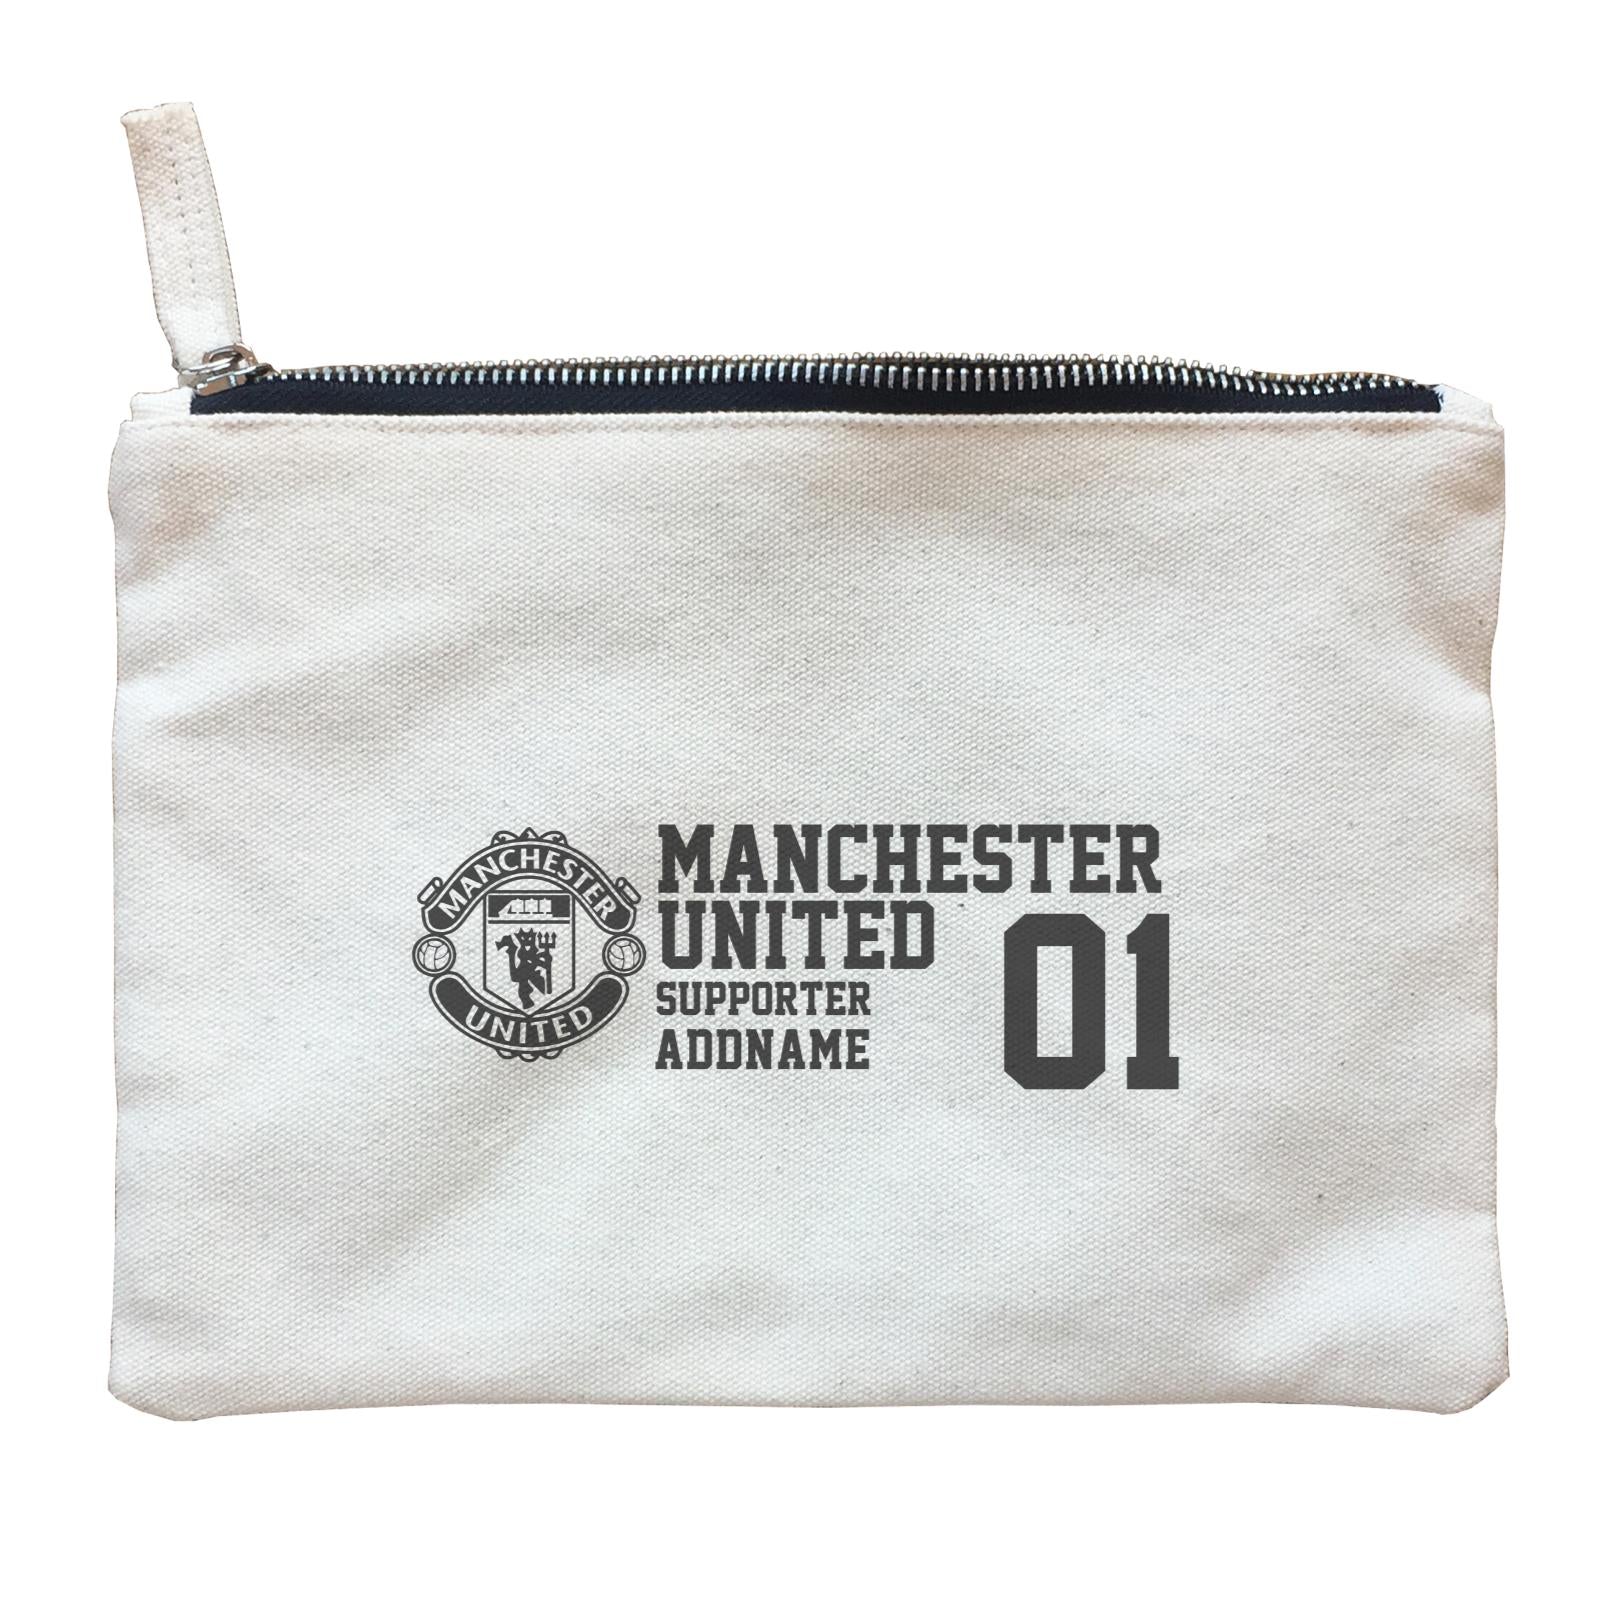 Manchester United Football Supporter Accessories Addname Zipper Pouch